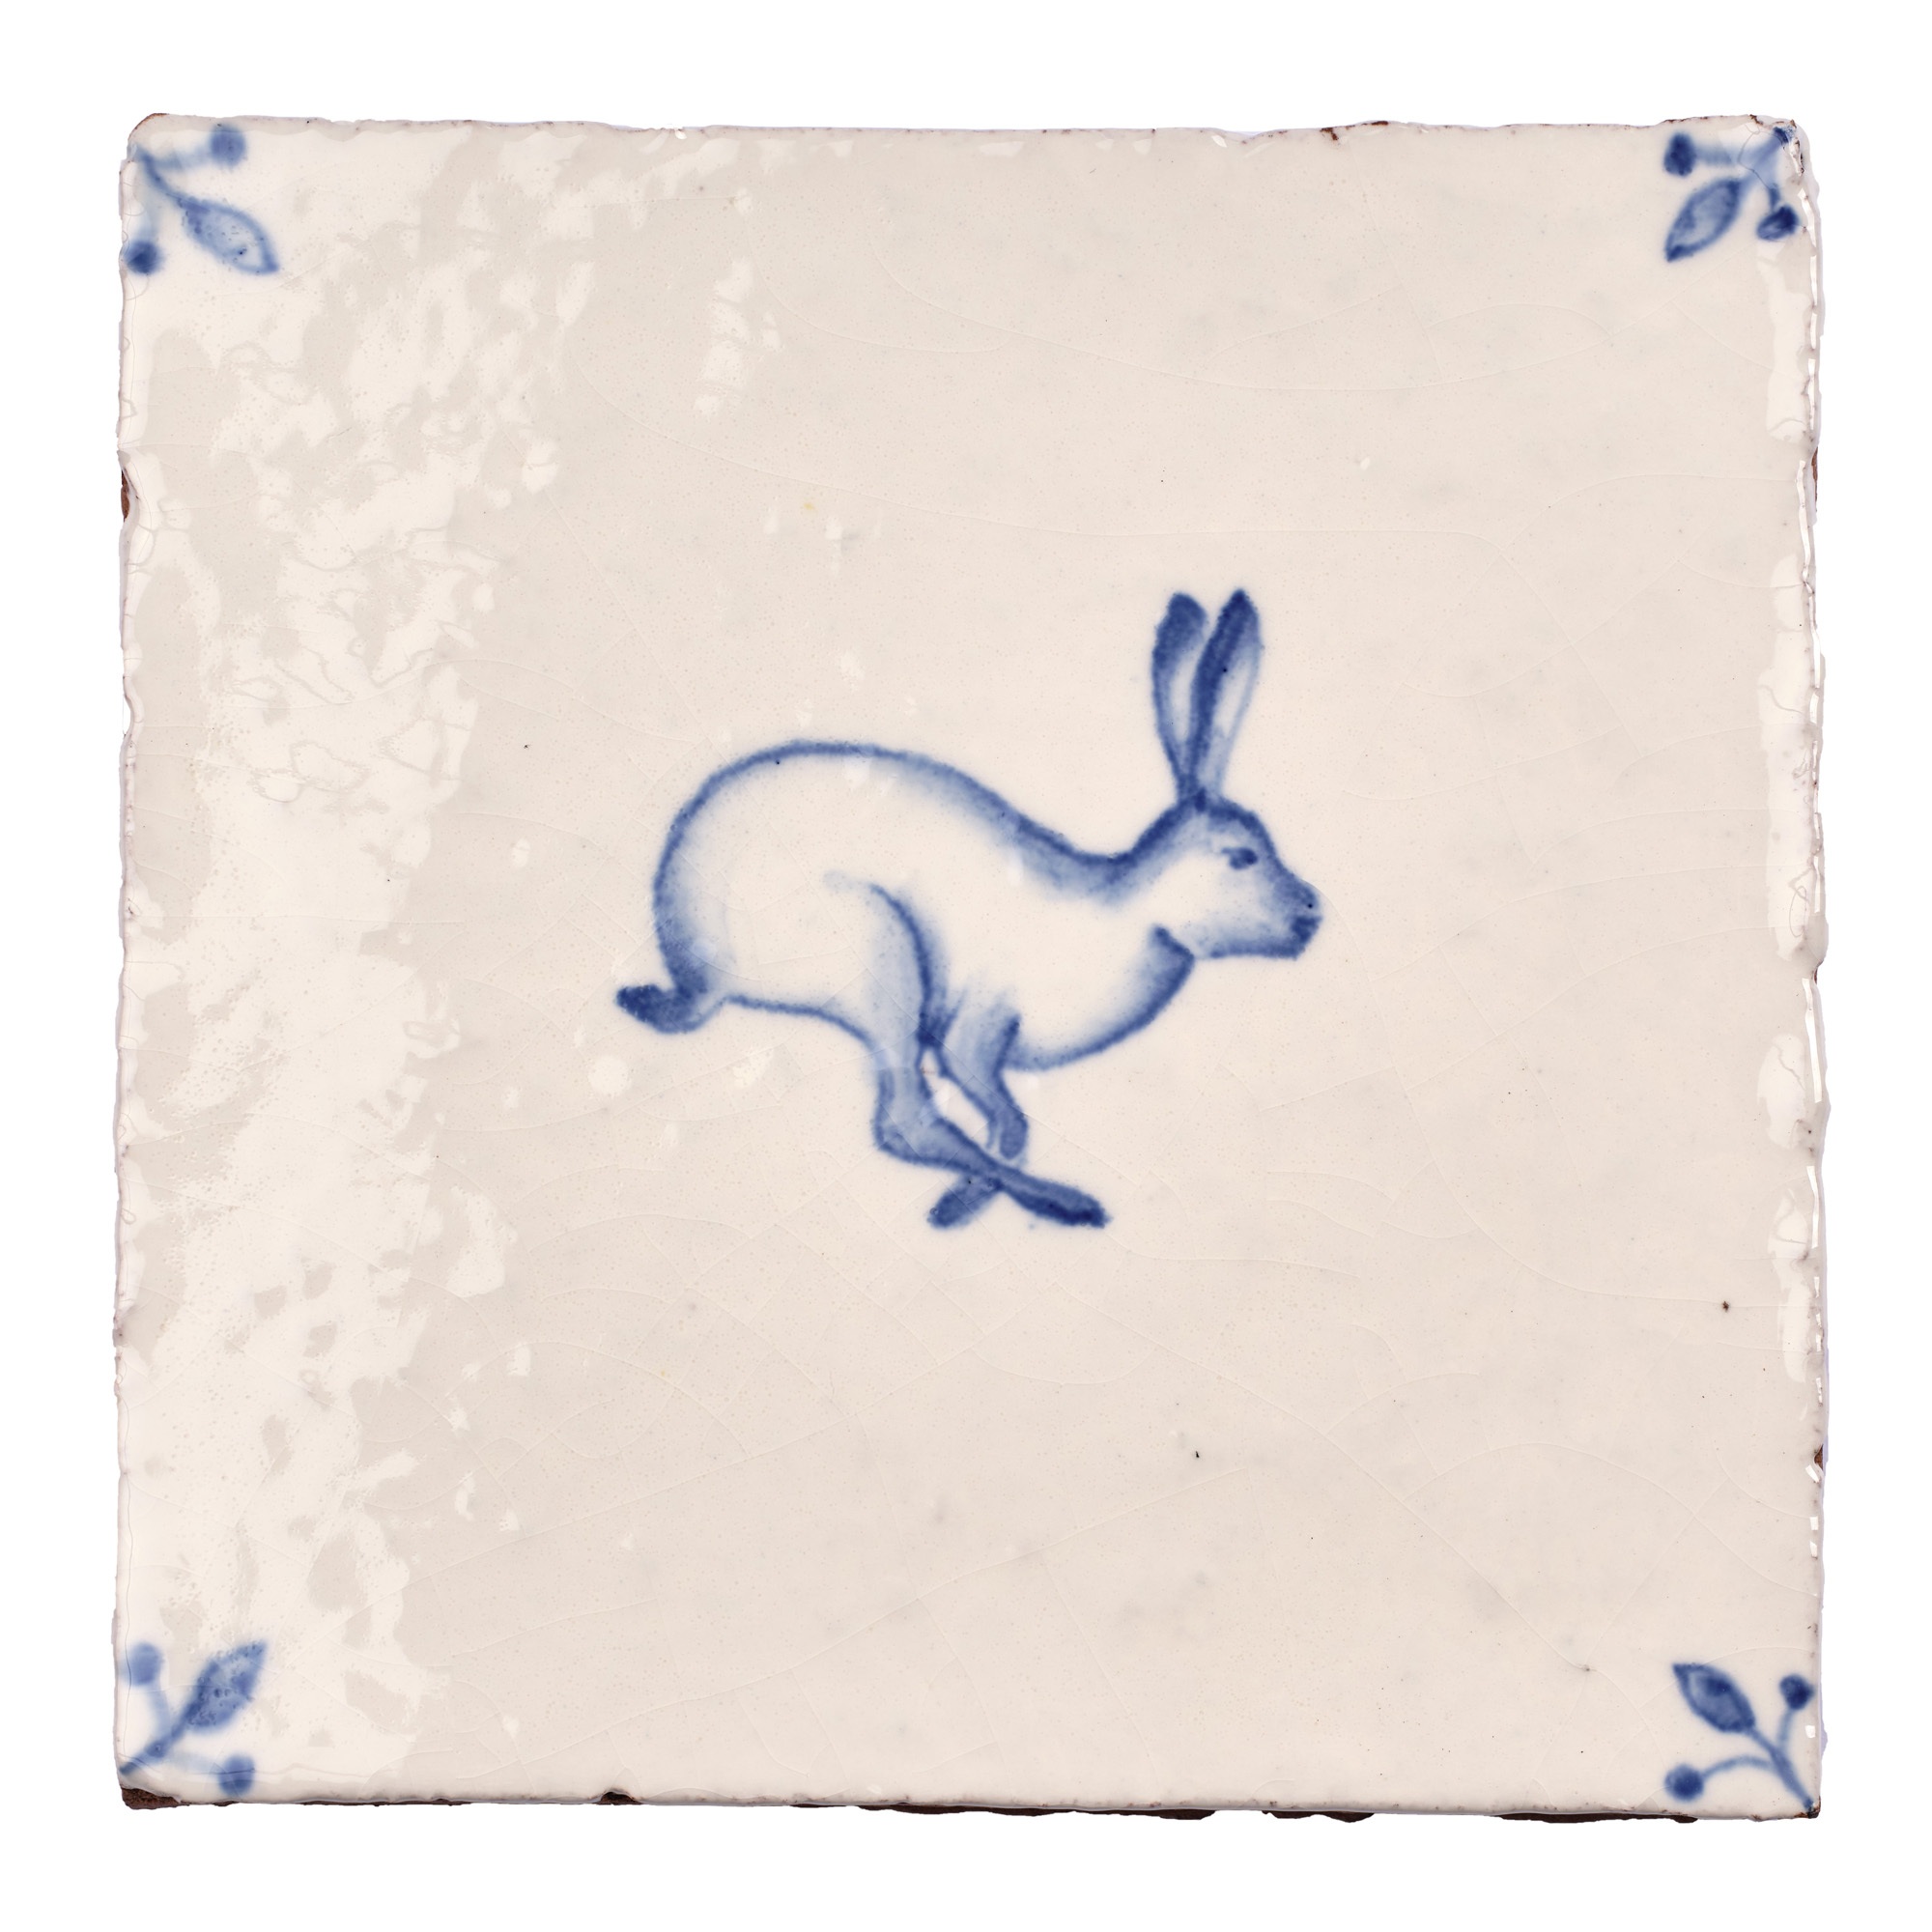 Wilding Hare with Corner Motif Square, product variant image